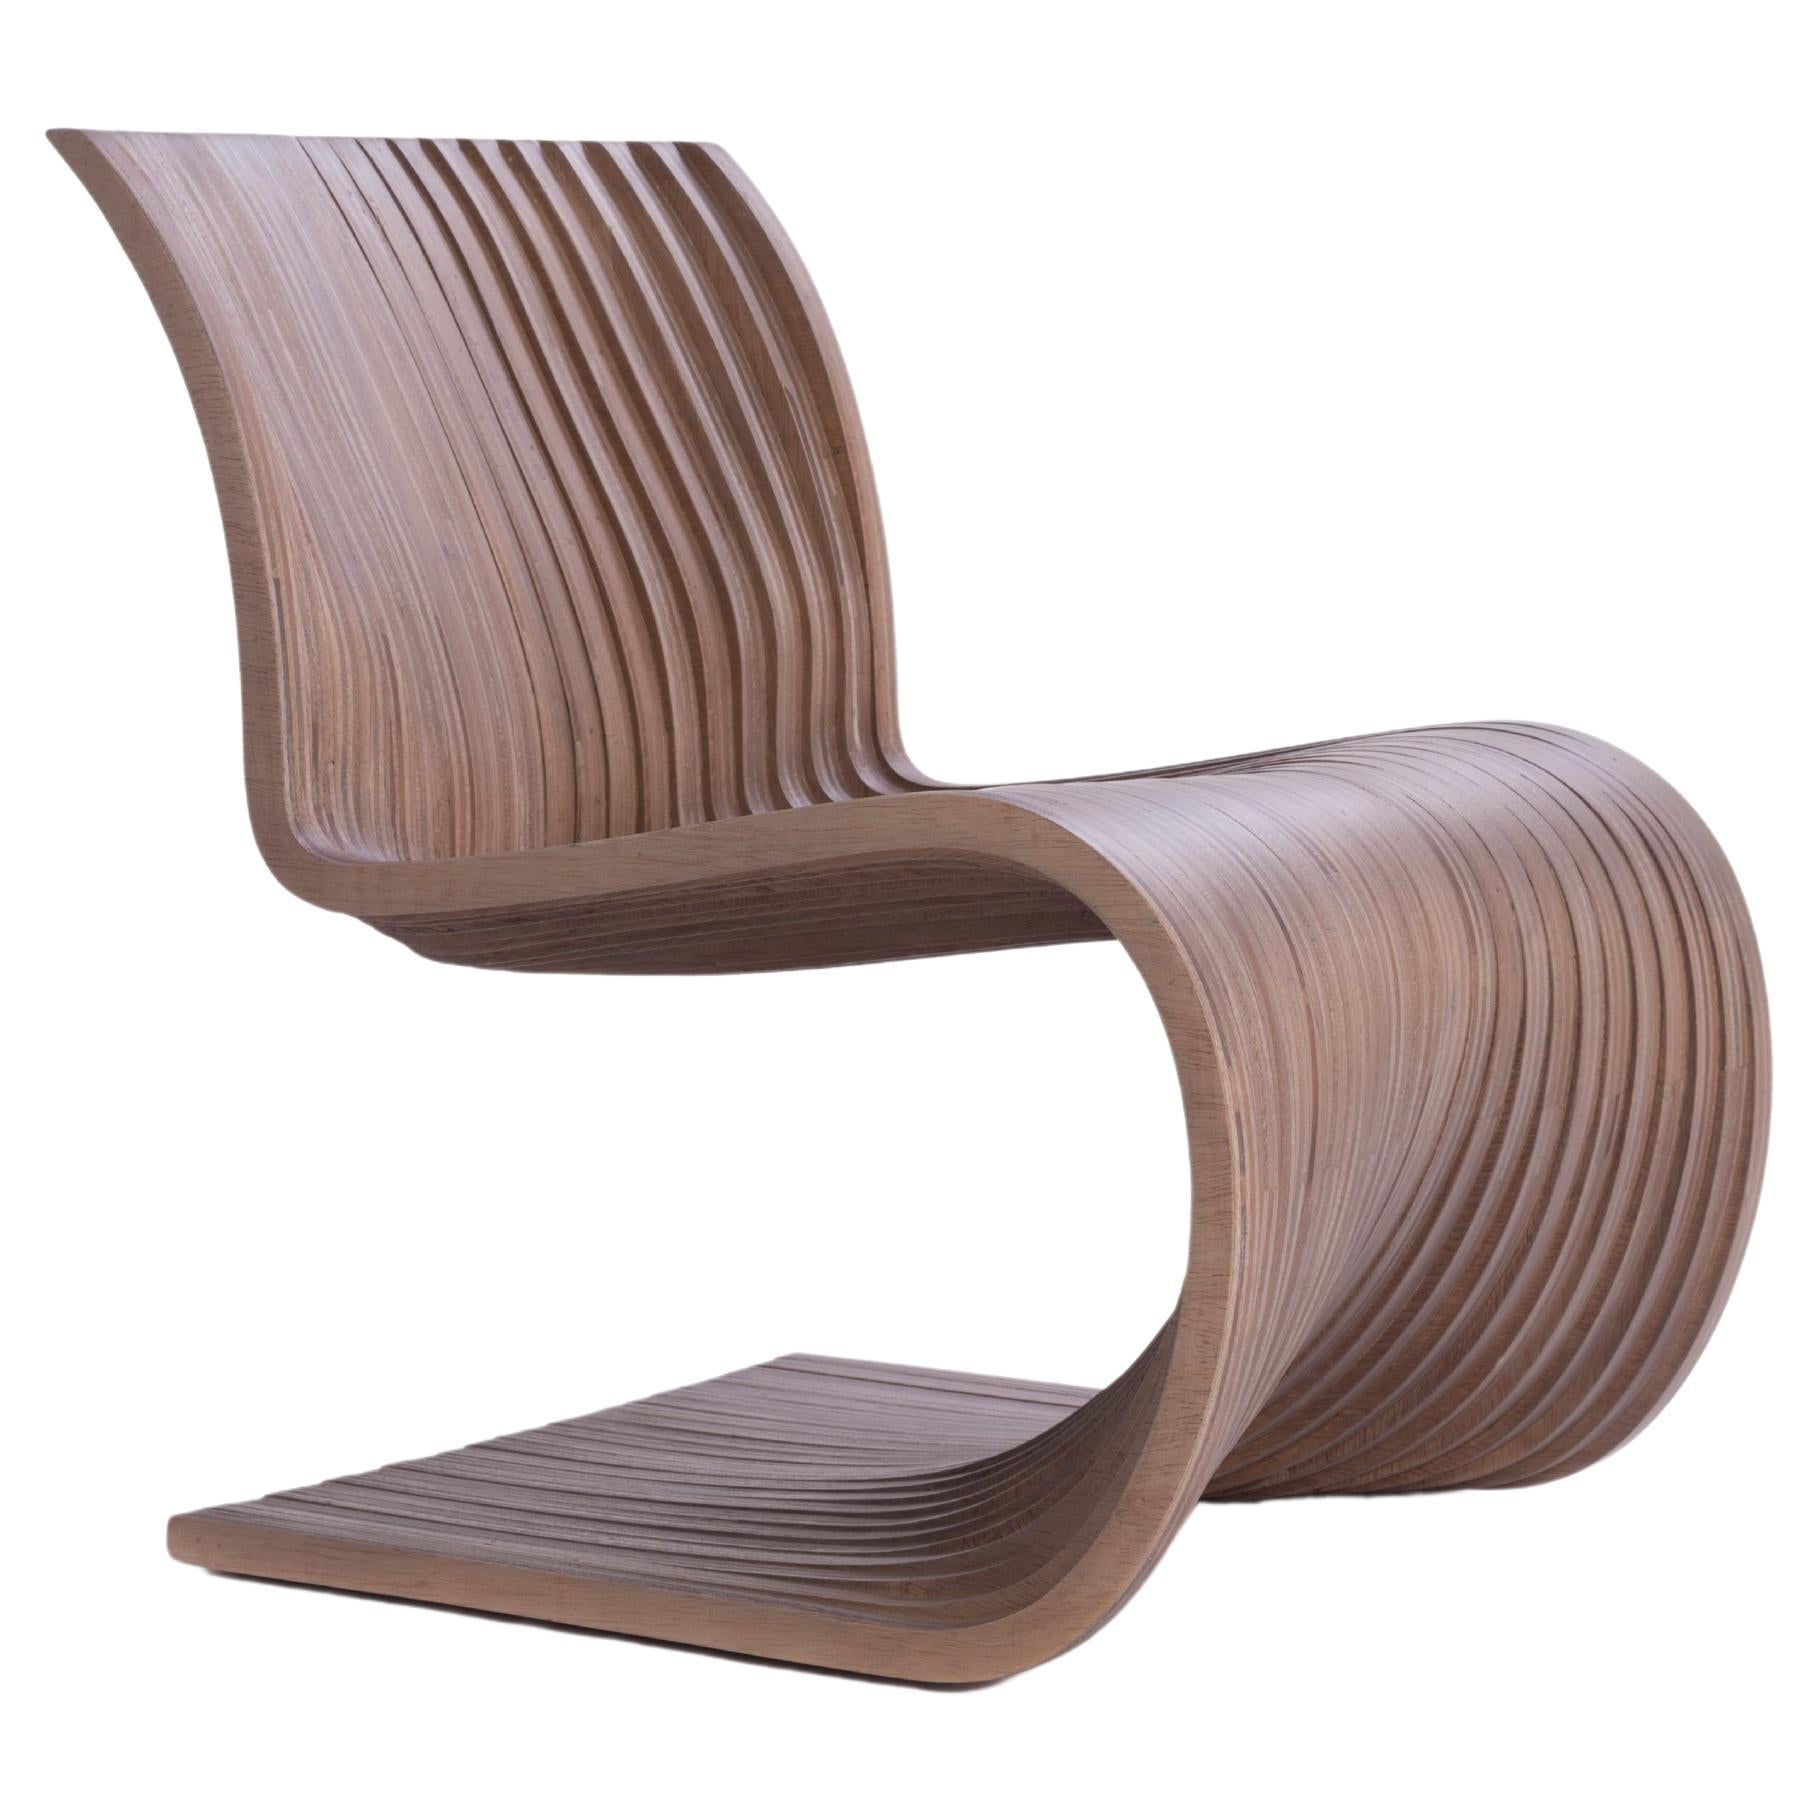 Efi S Chair by Piegatto, a Sculptural Contemporary Lounge Chair For Sale